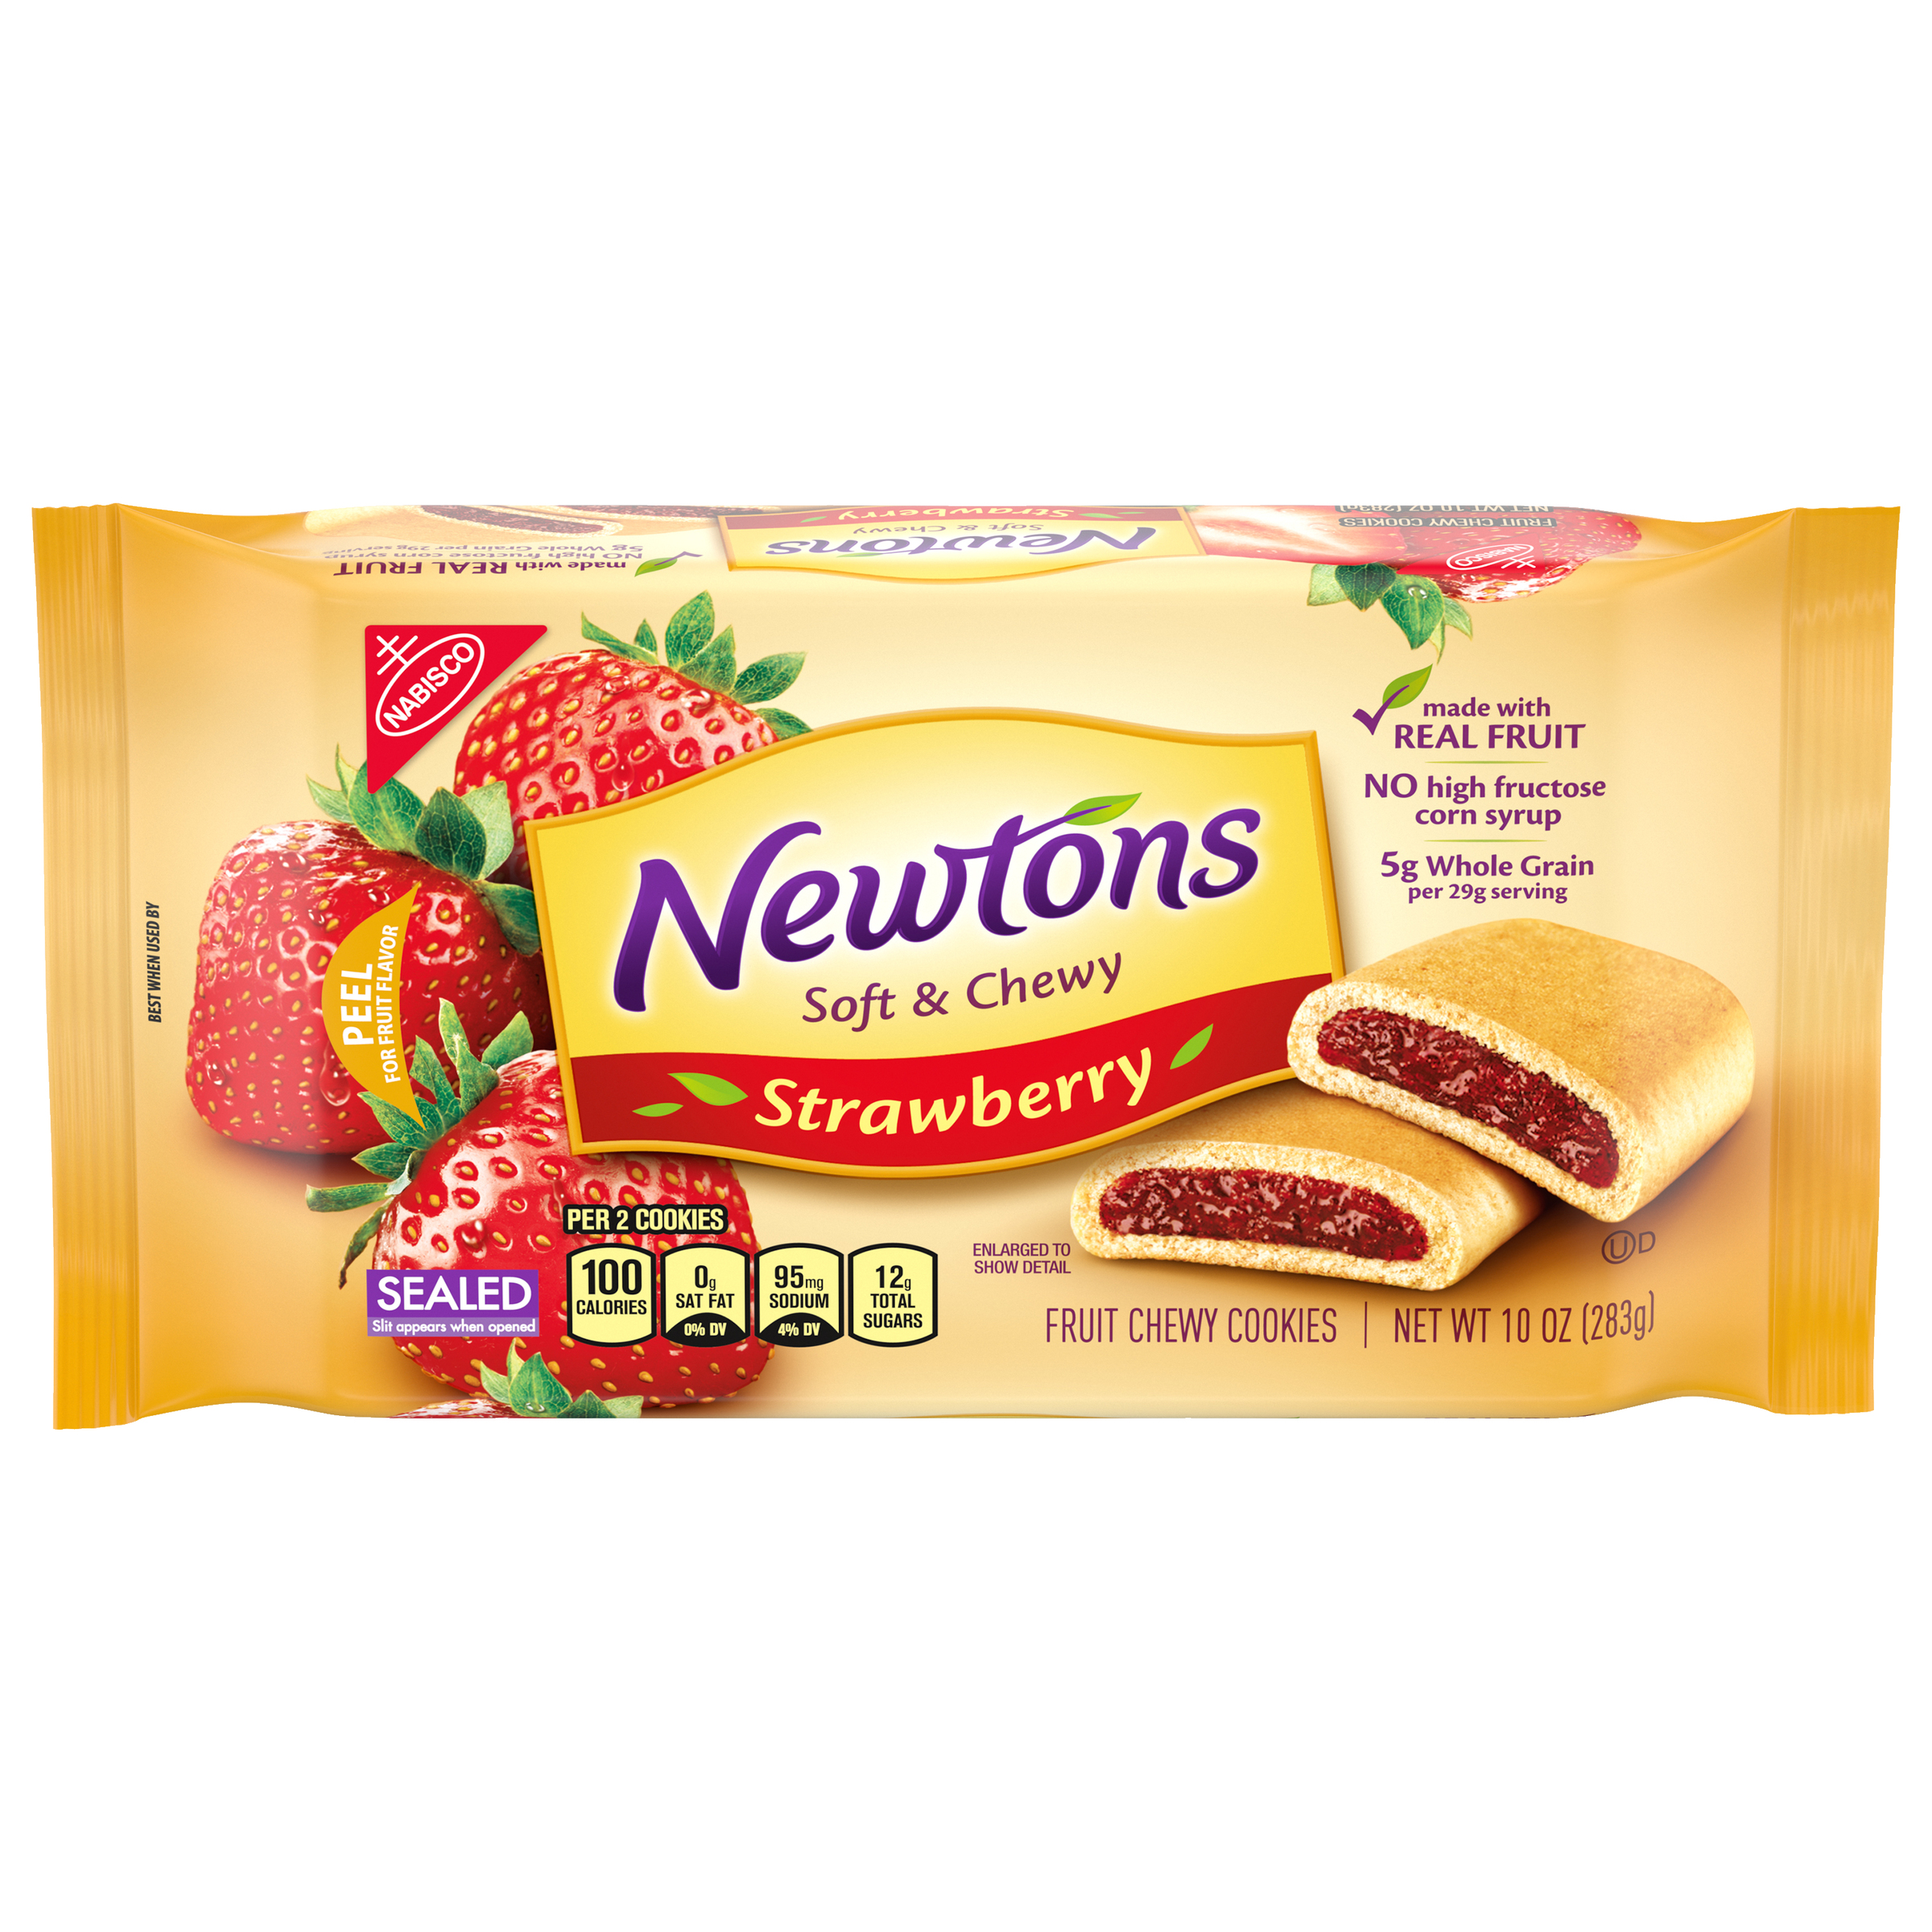 Newtons Soft & Fruit Chewy Strawberry Cookies, 10 oz Pack-0